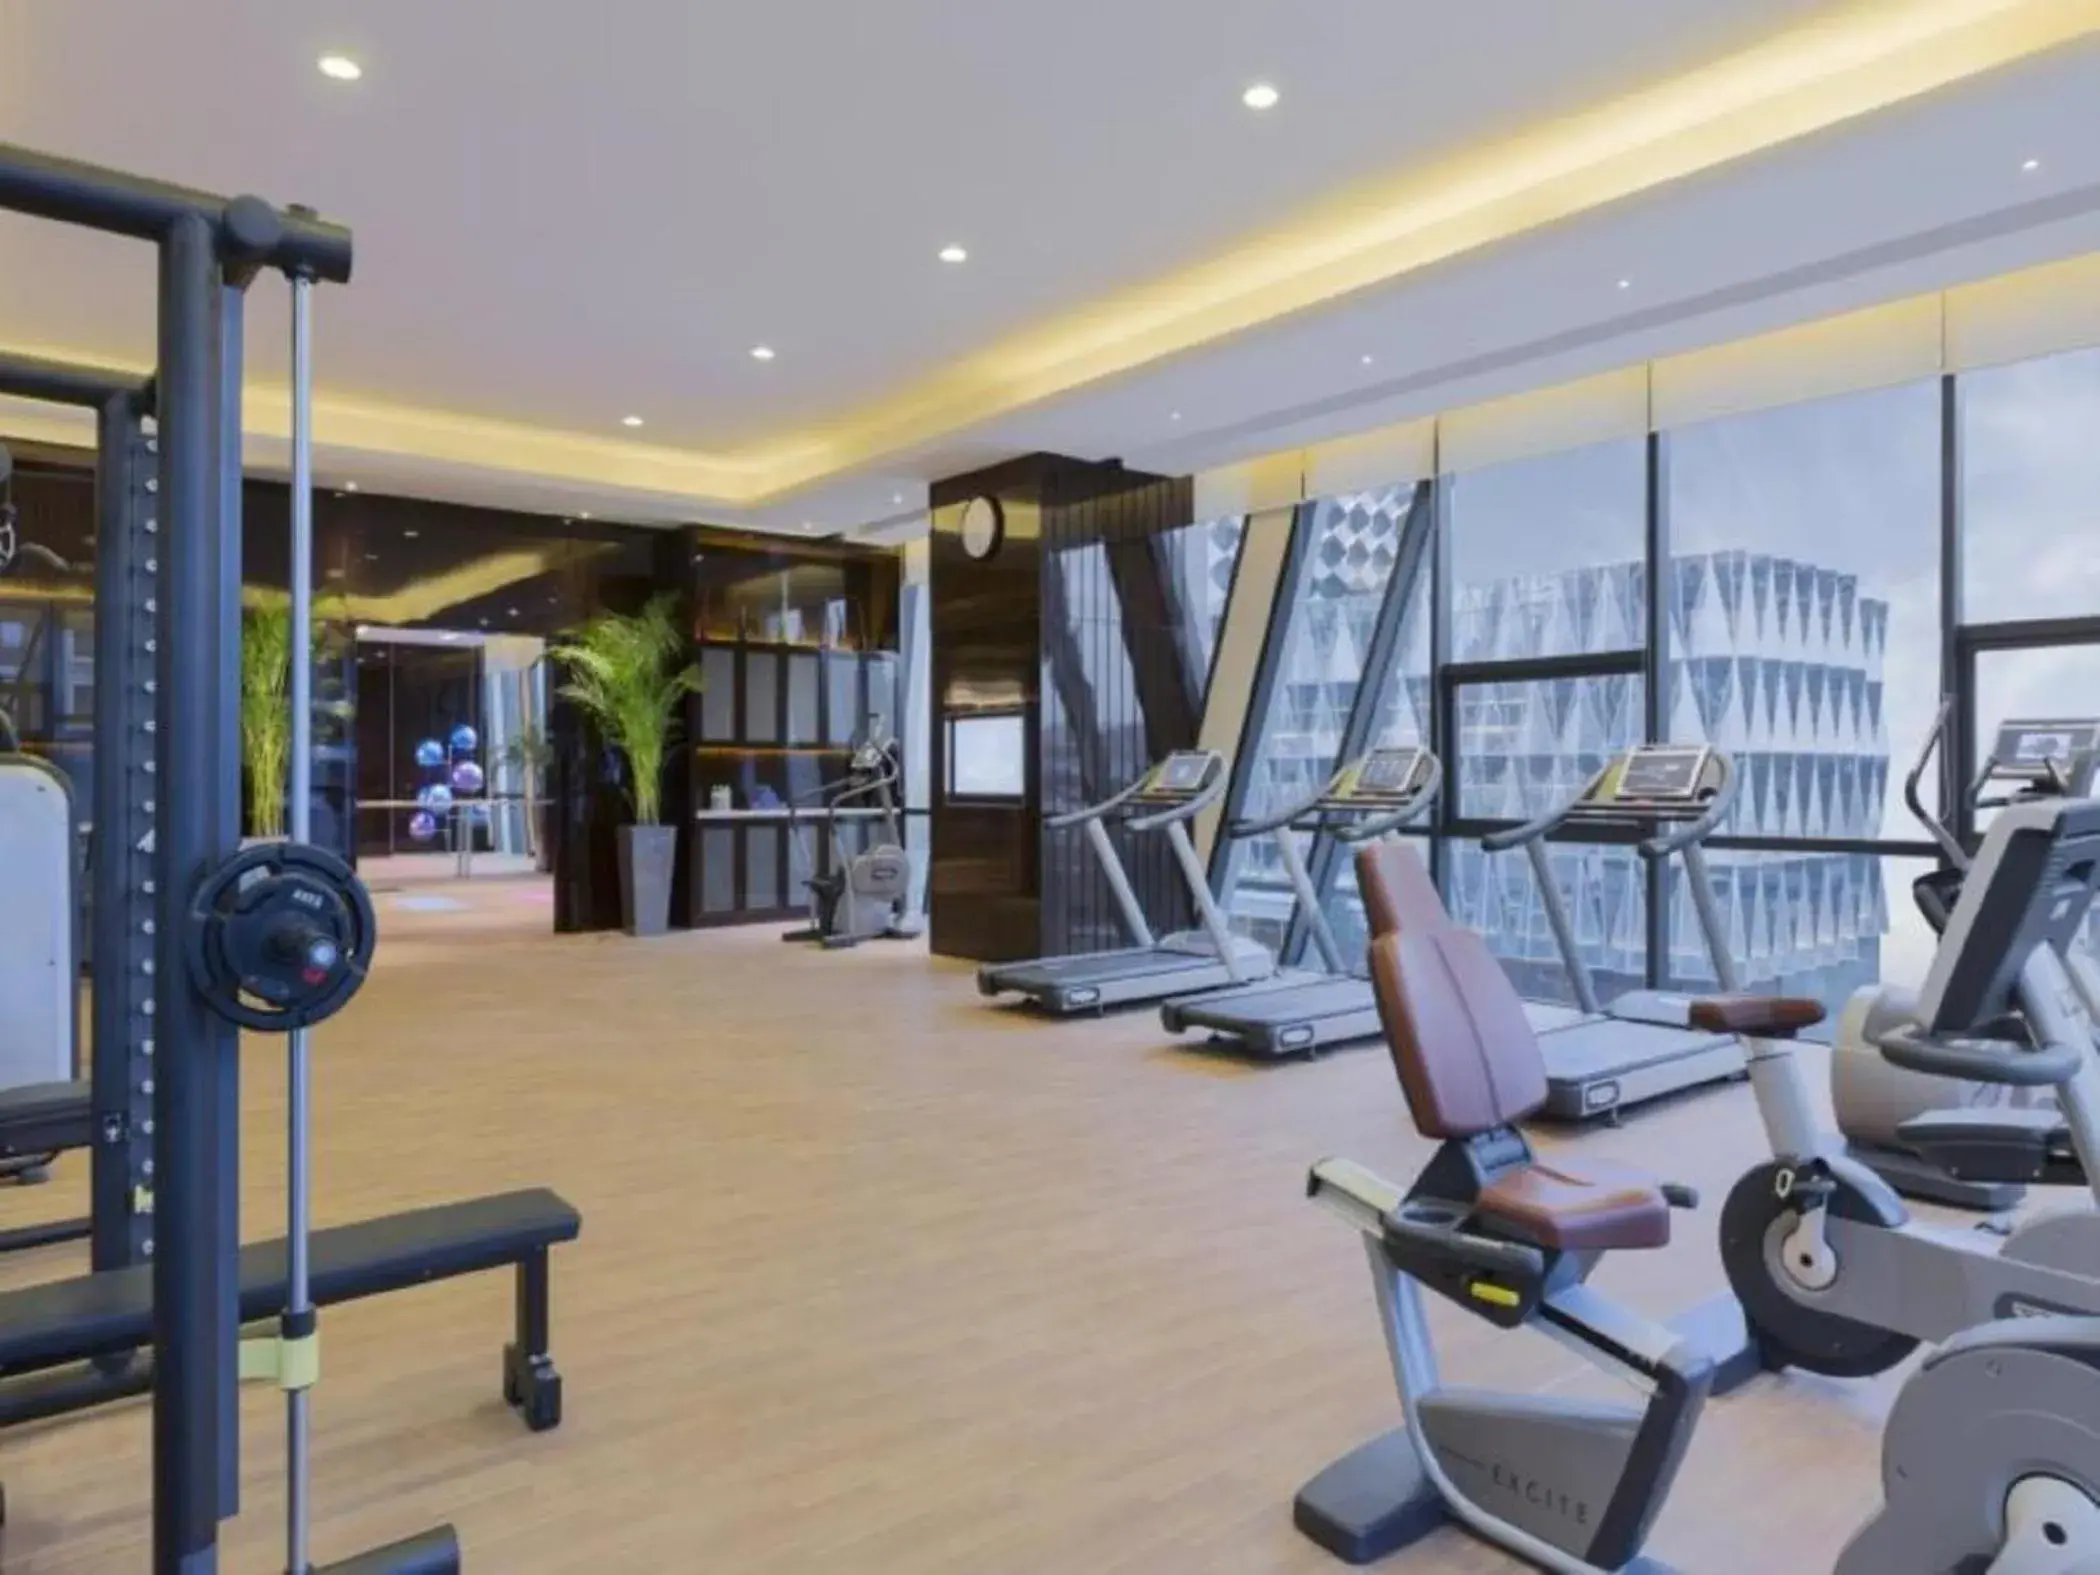 Fitness centre/facilities, Fitness Center/Facilities in Wanda Realm Wuhan